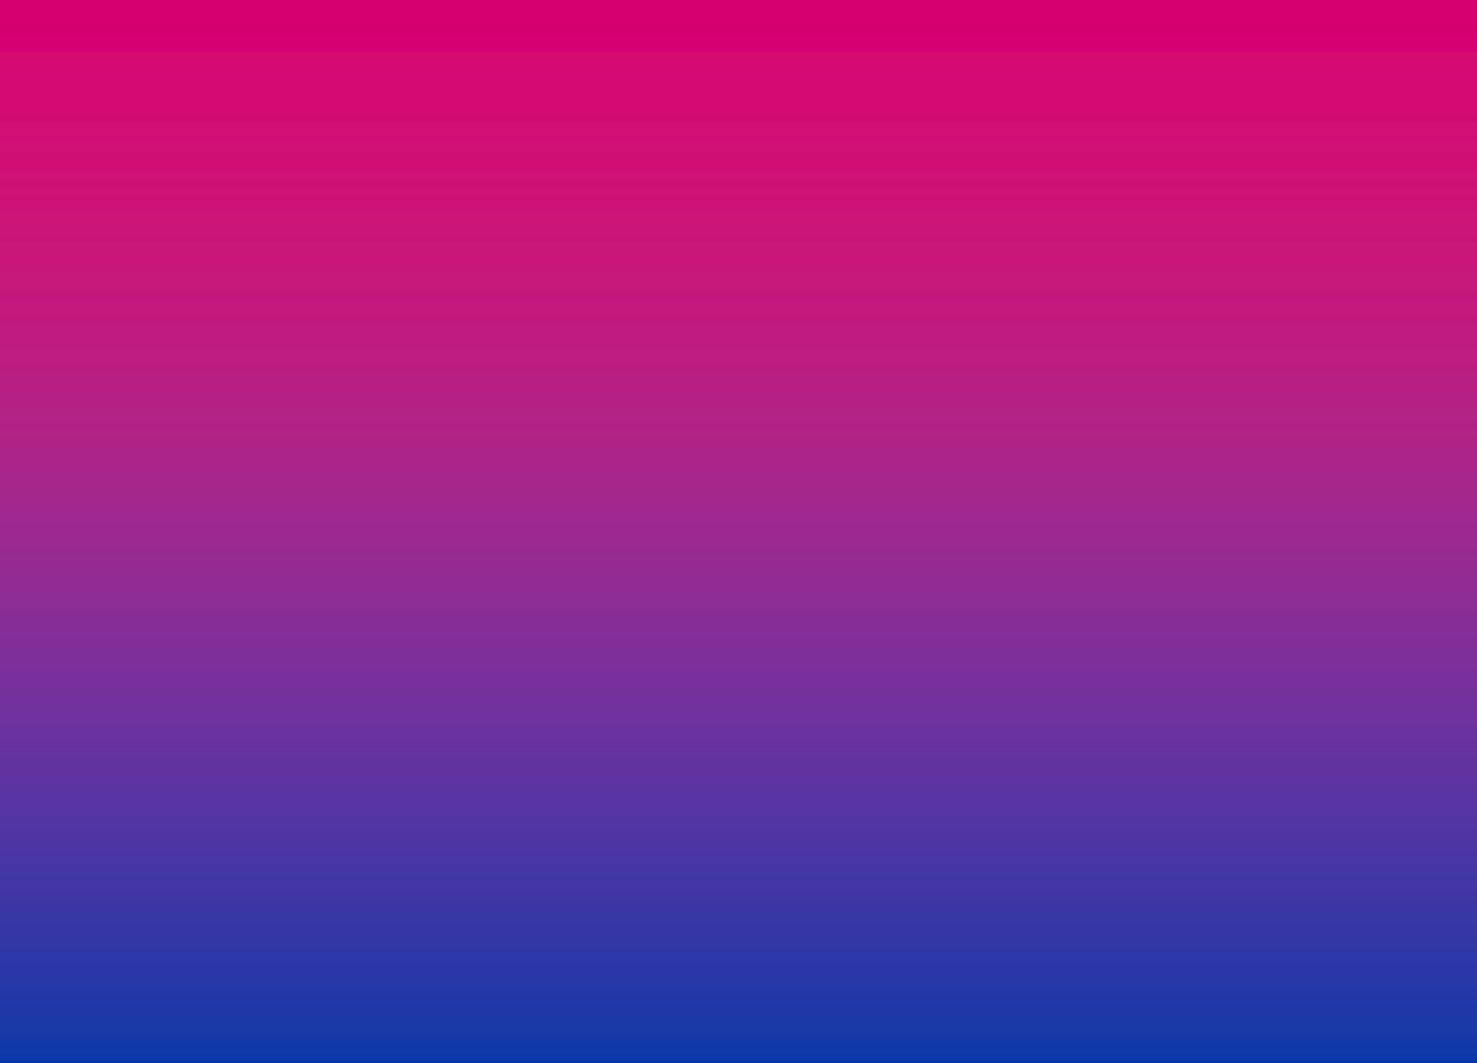 Top 999 Bisexual Flag Wallpaper Full Hd 4k Free To Use